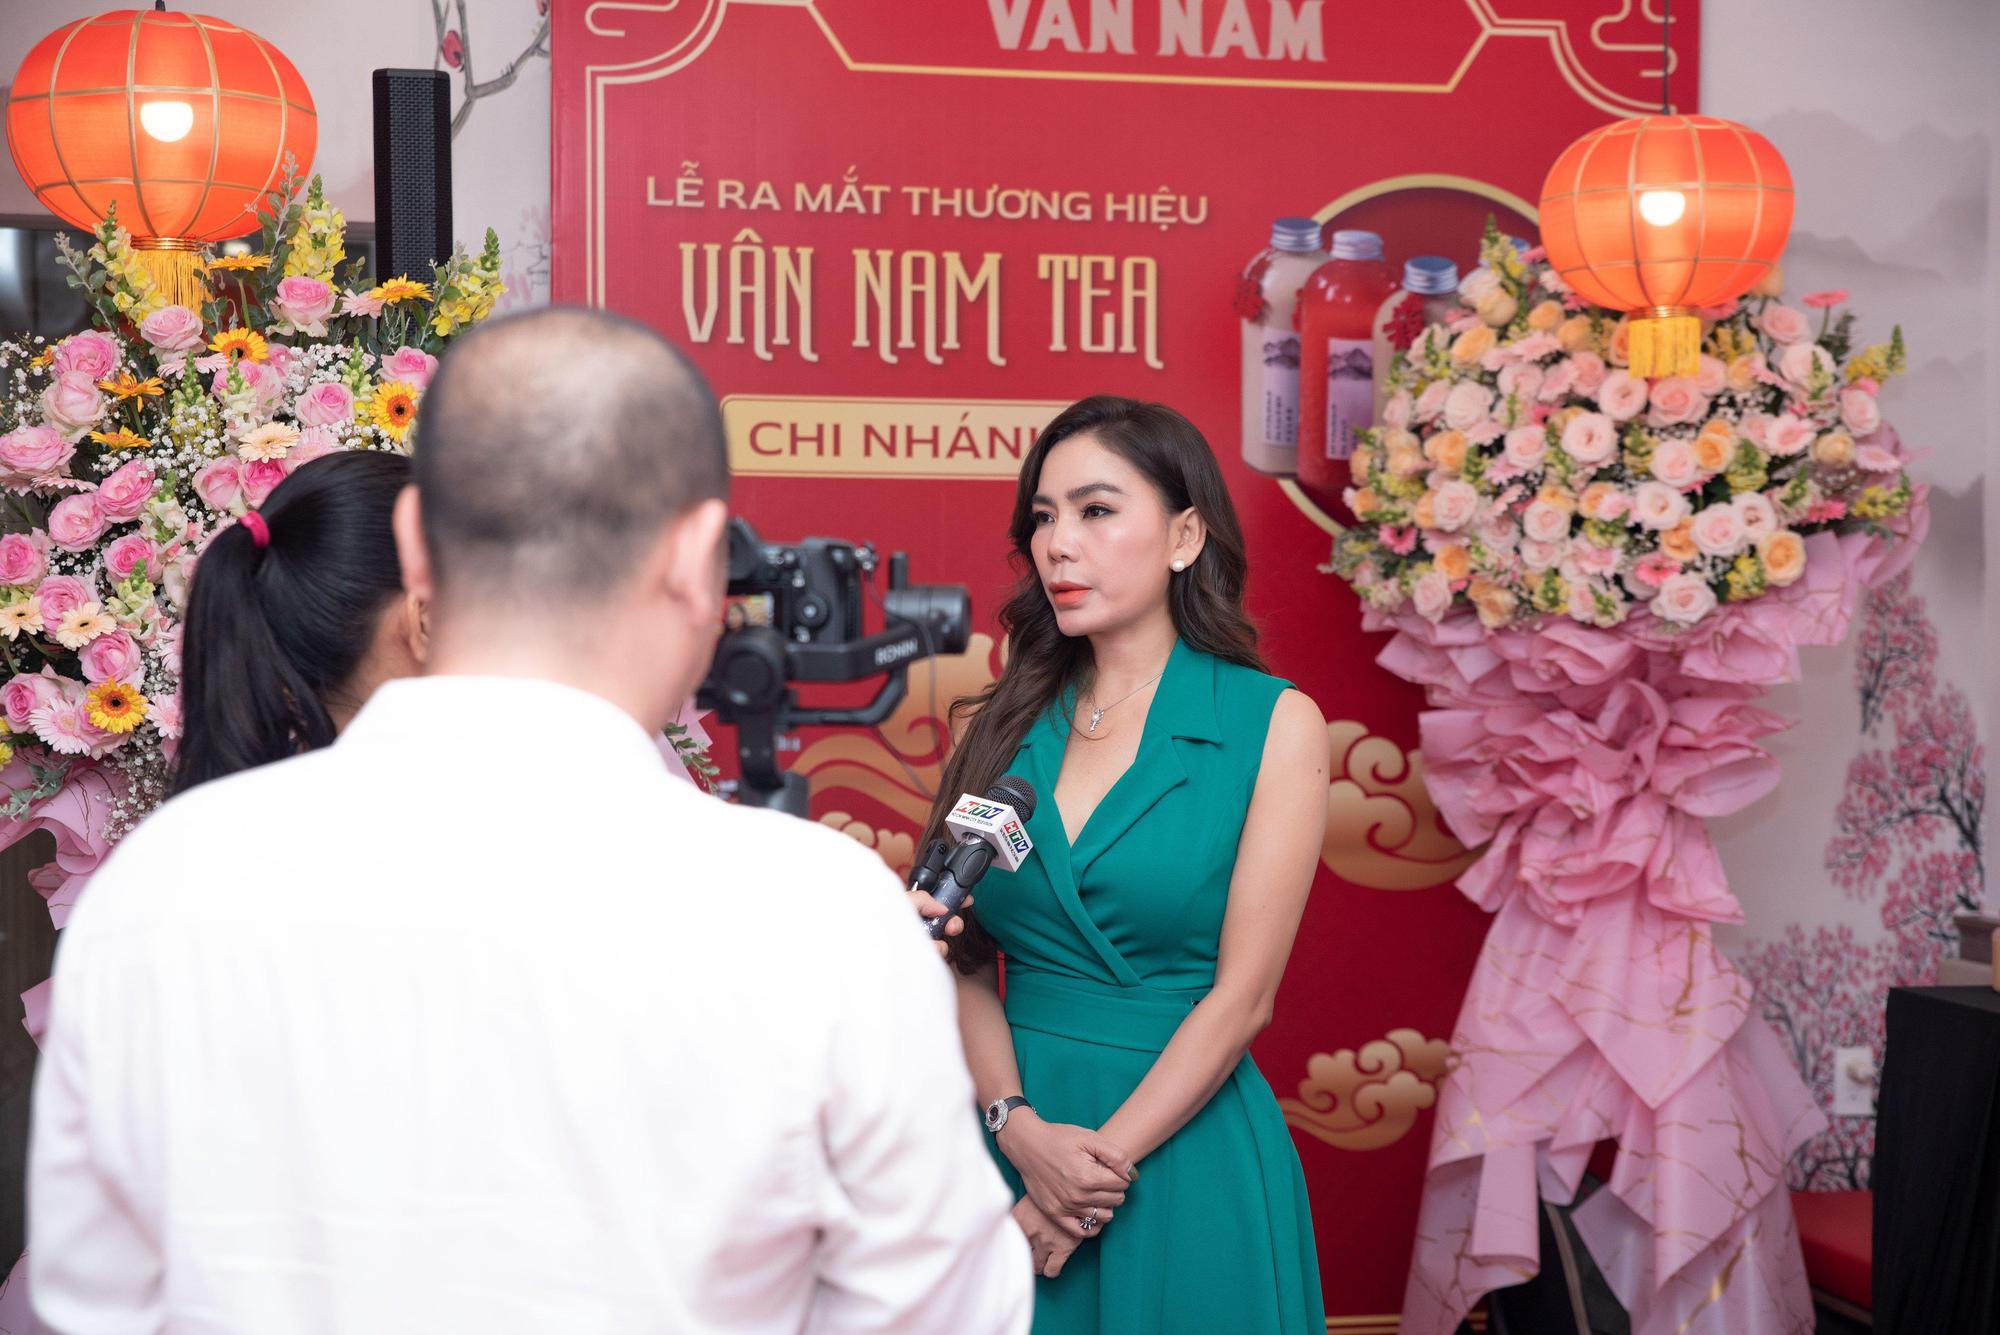 Opening the Van Nam Tea & Coffee brand in Ho Chi Minh City.  Ho Chi Minh - Photo 1.